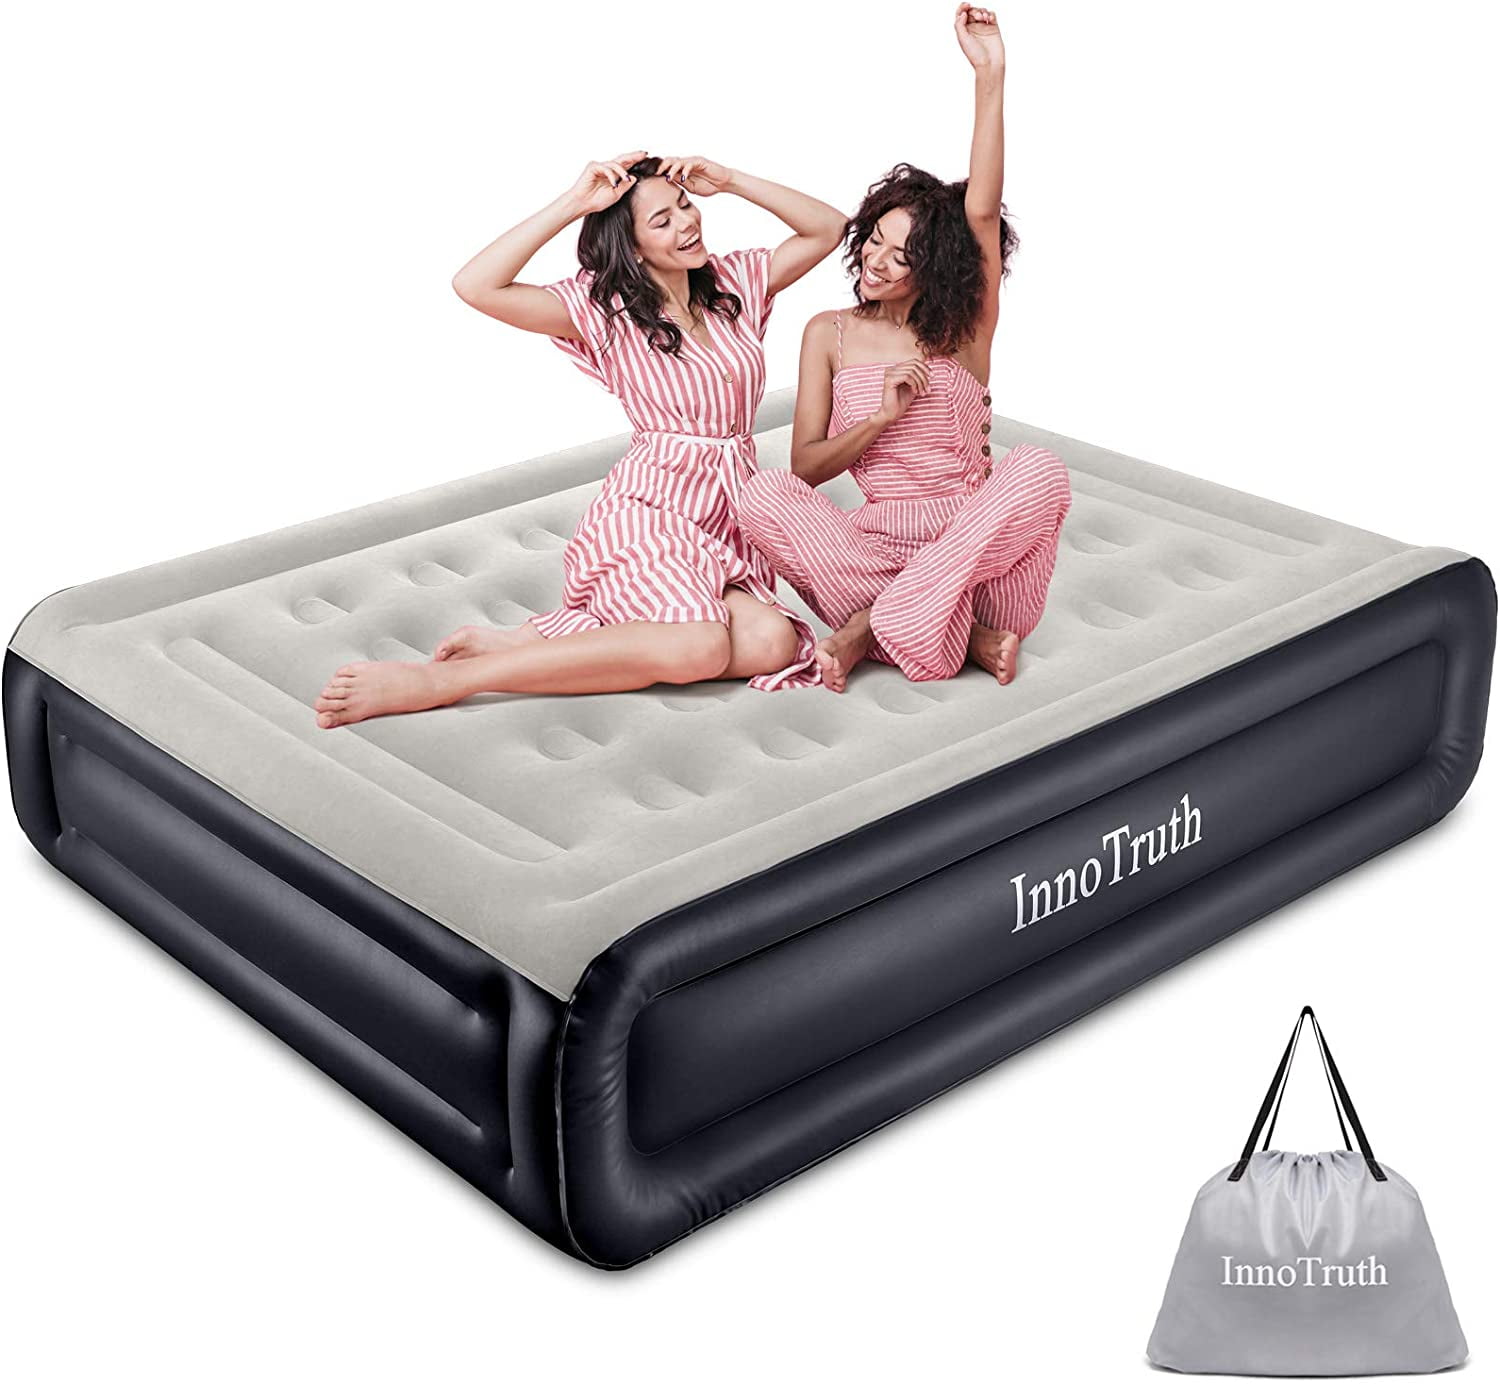 Air Bed Mattress With Built In AC Pump Rest Inflatable Airbed Size Queen Pillow 